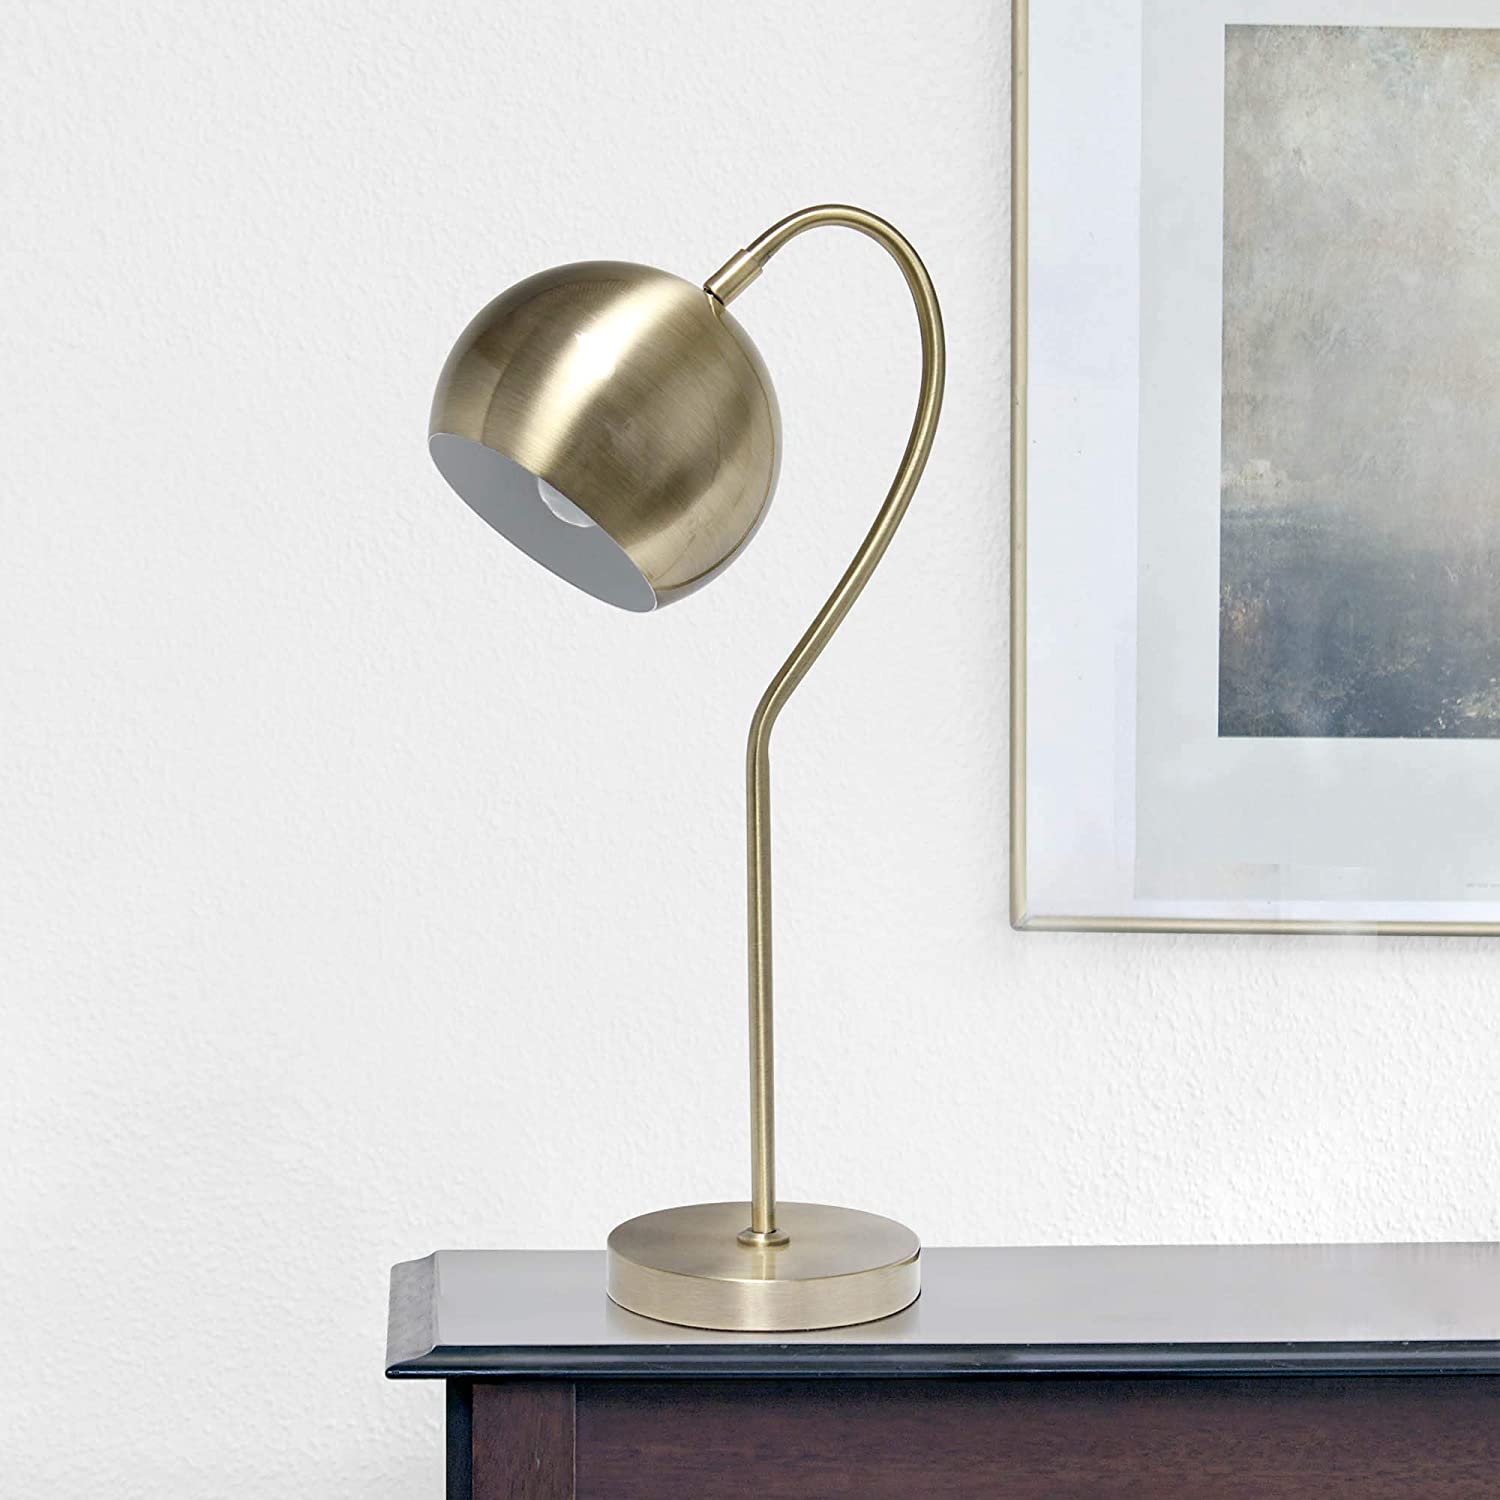 Lalia Home Decorative Mid Century Curved Table Lamp with Dome Shade, Antique Brass